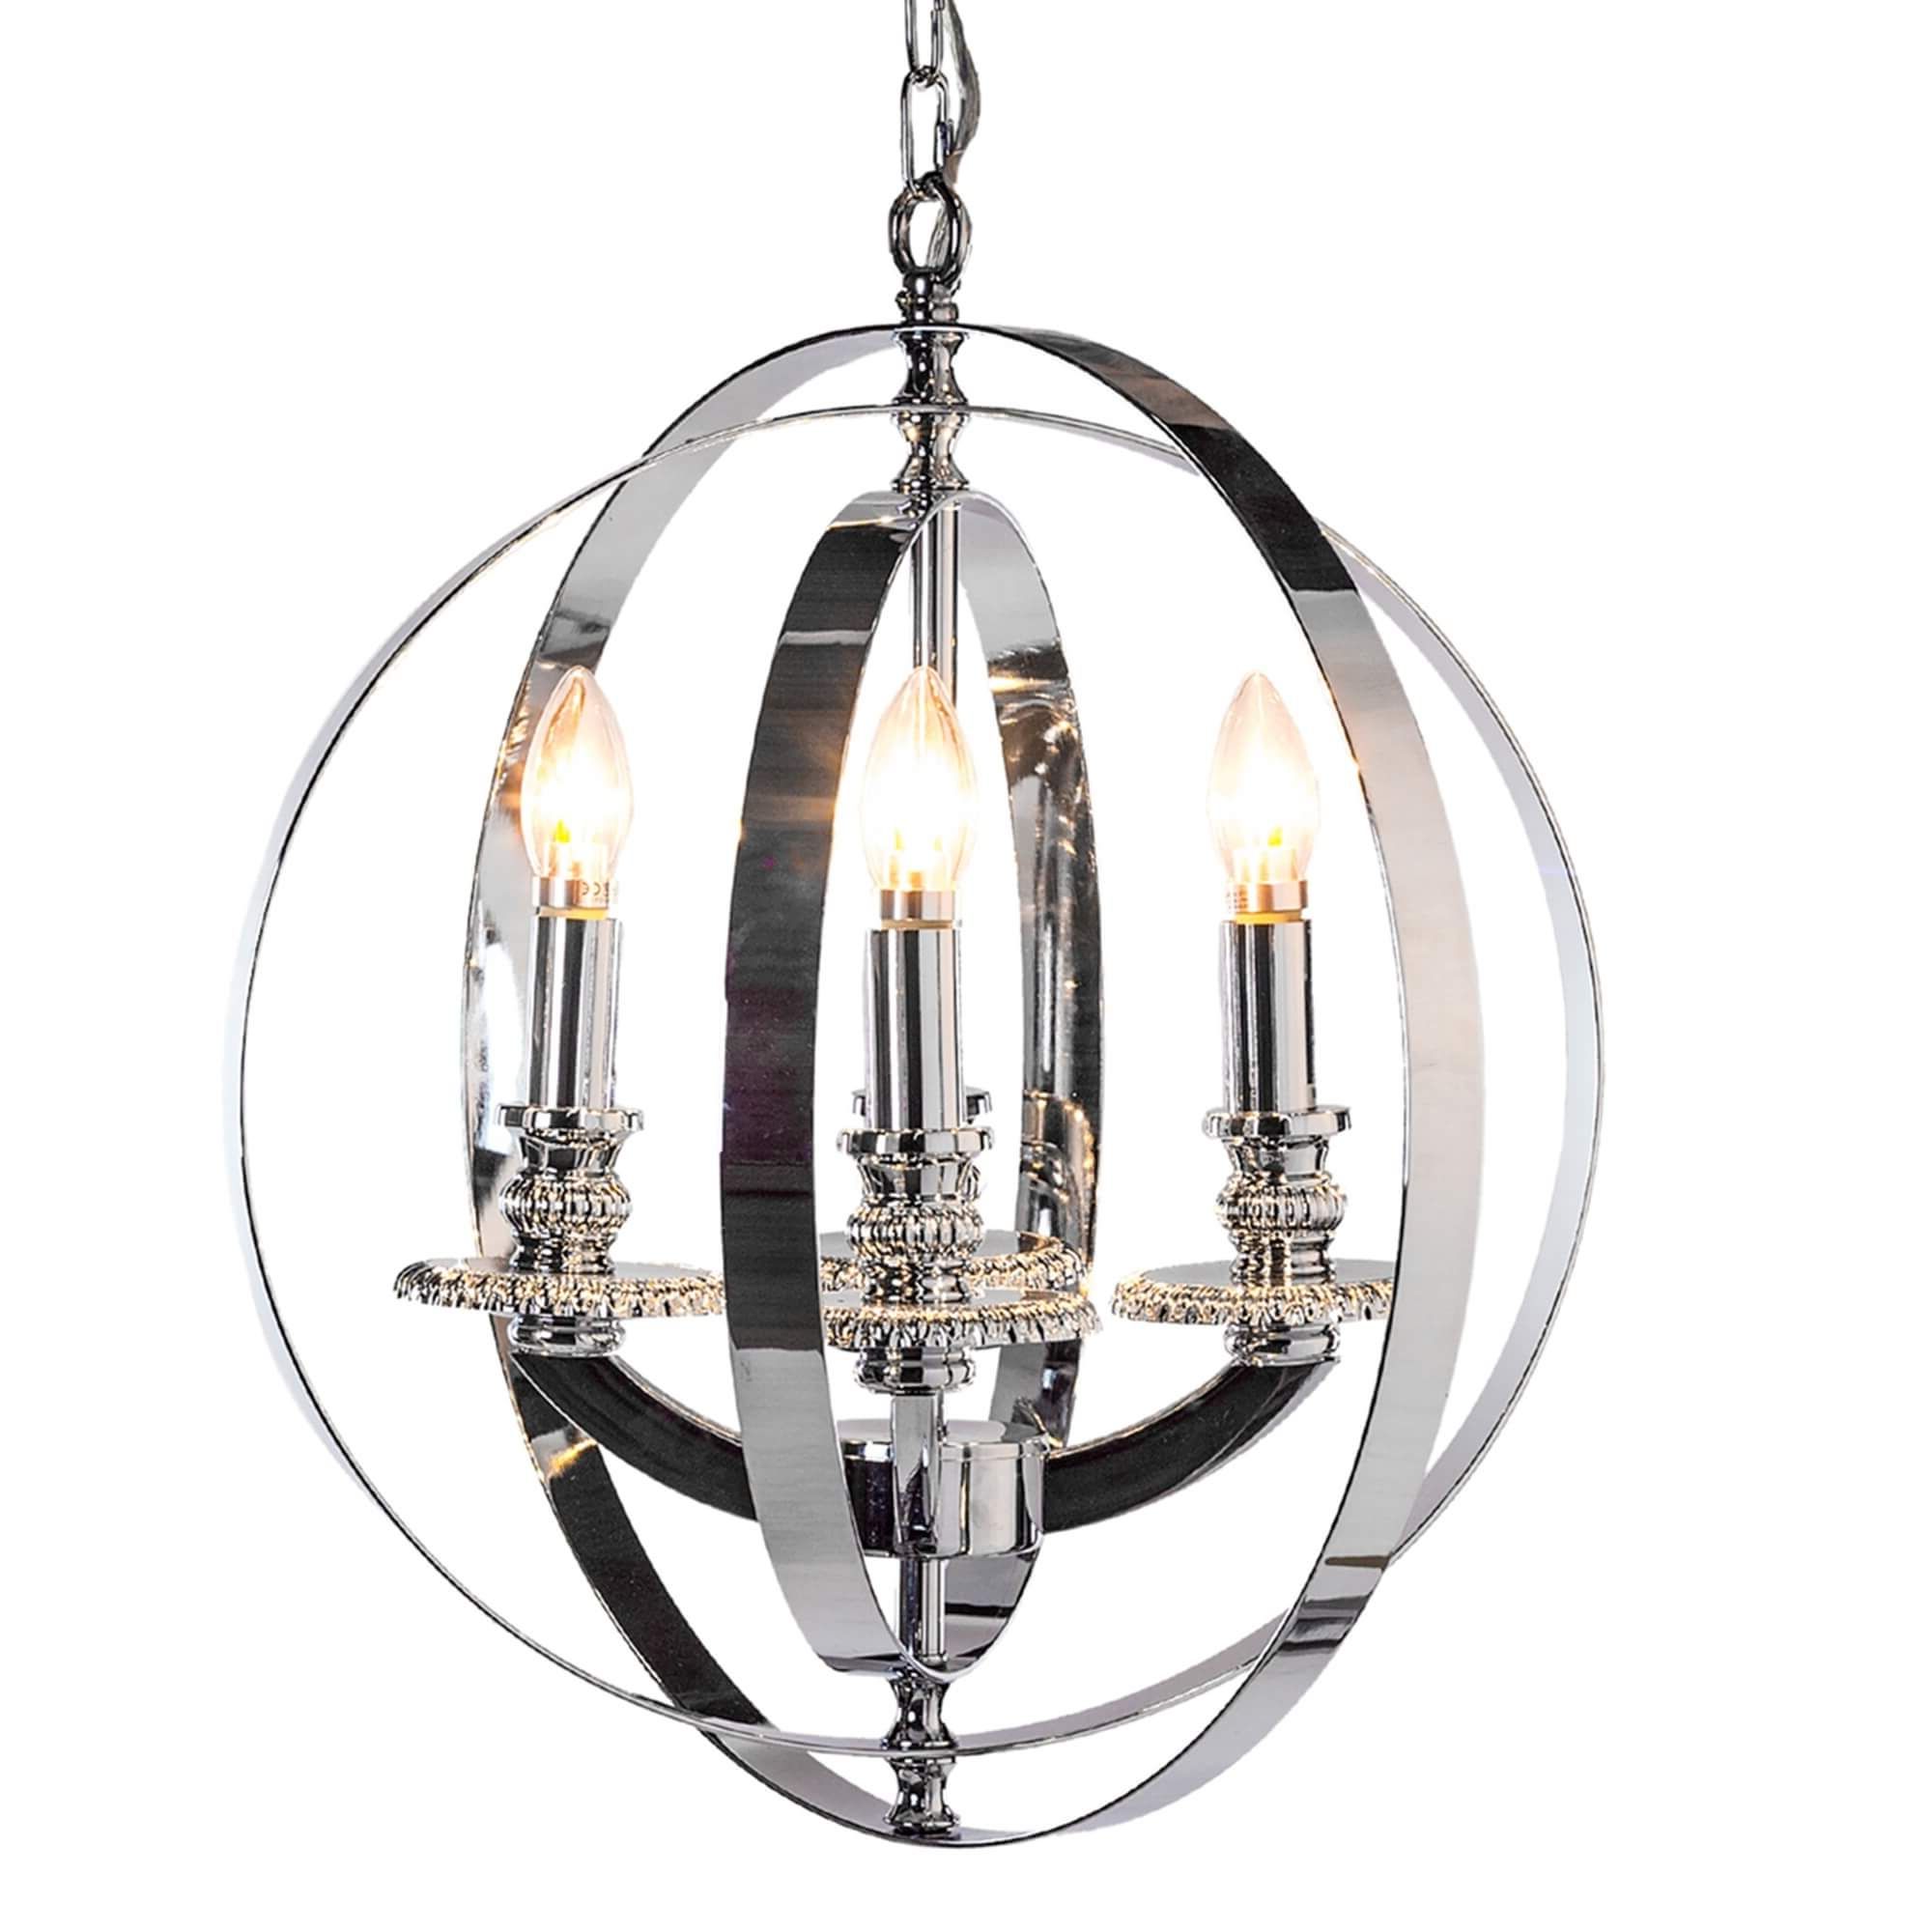 Odelia 3 Way Ceiling Chandelier, Brushed Gold Finish Within Recent Antique Gold Three Light Chandeliers (View 1 of 20)